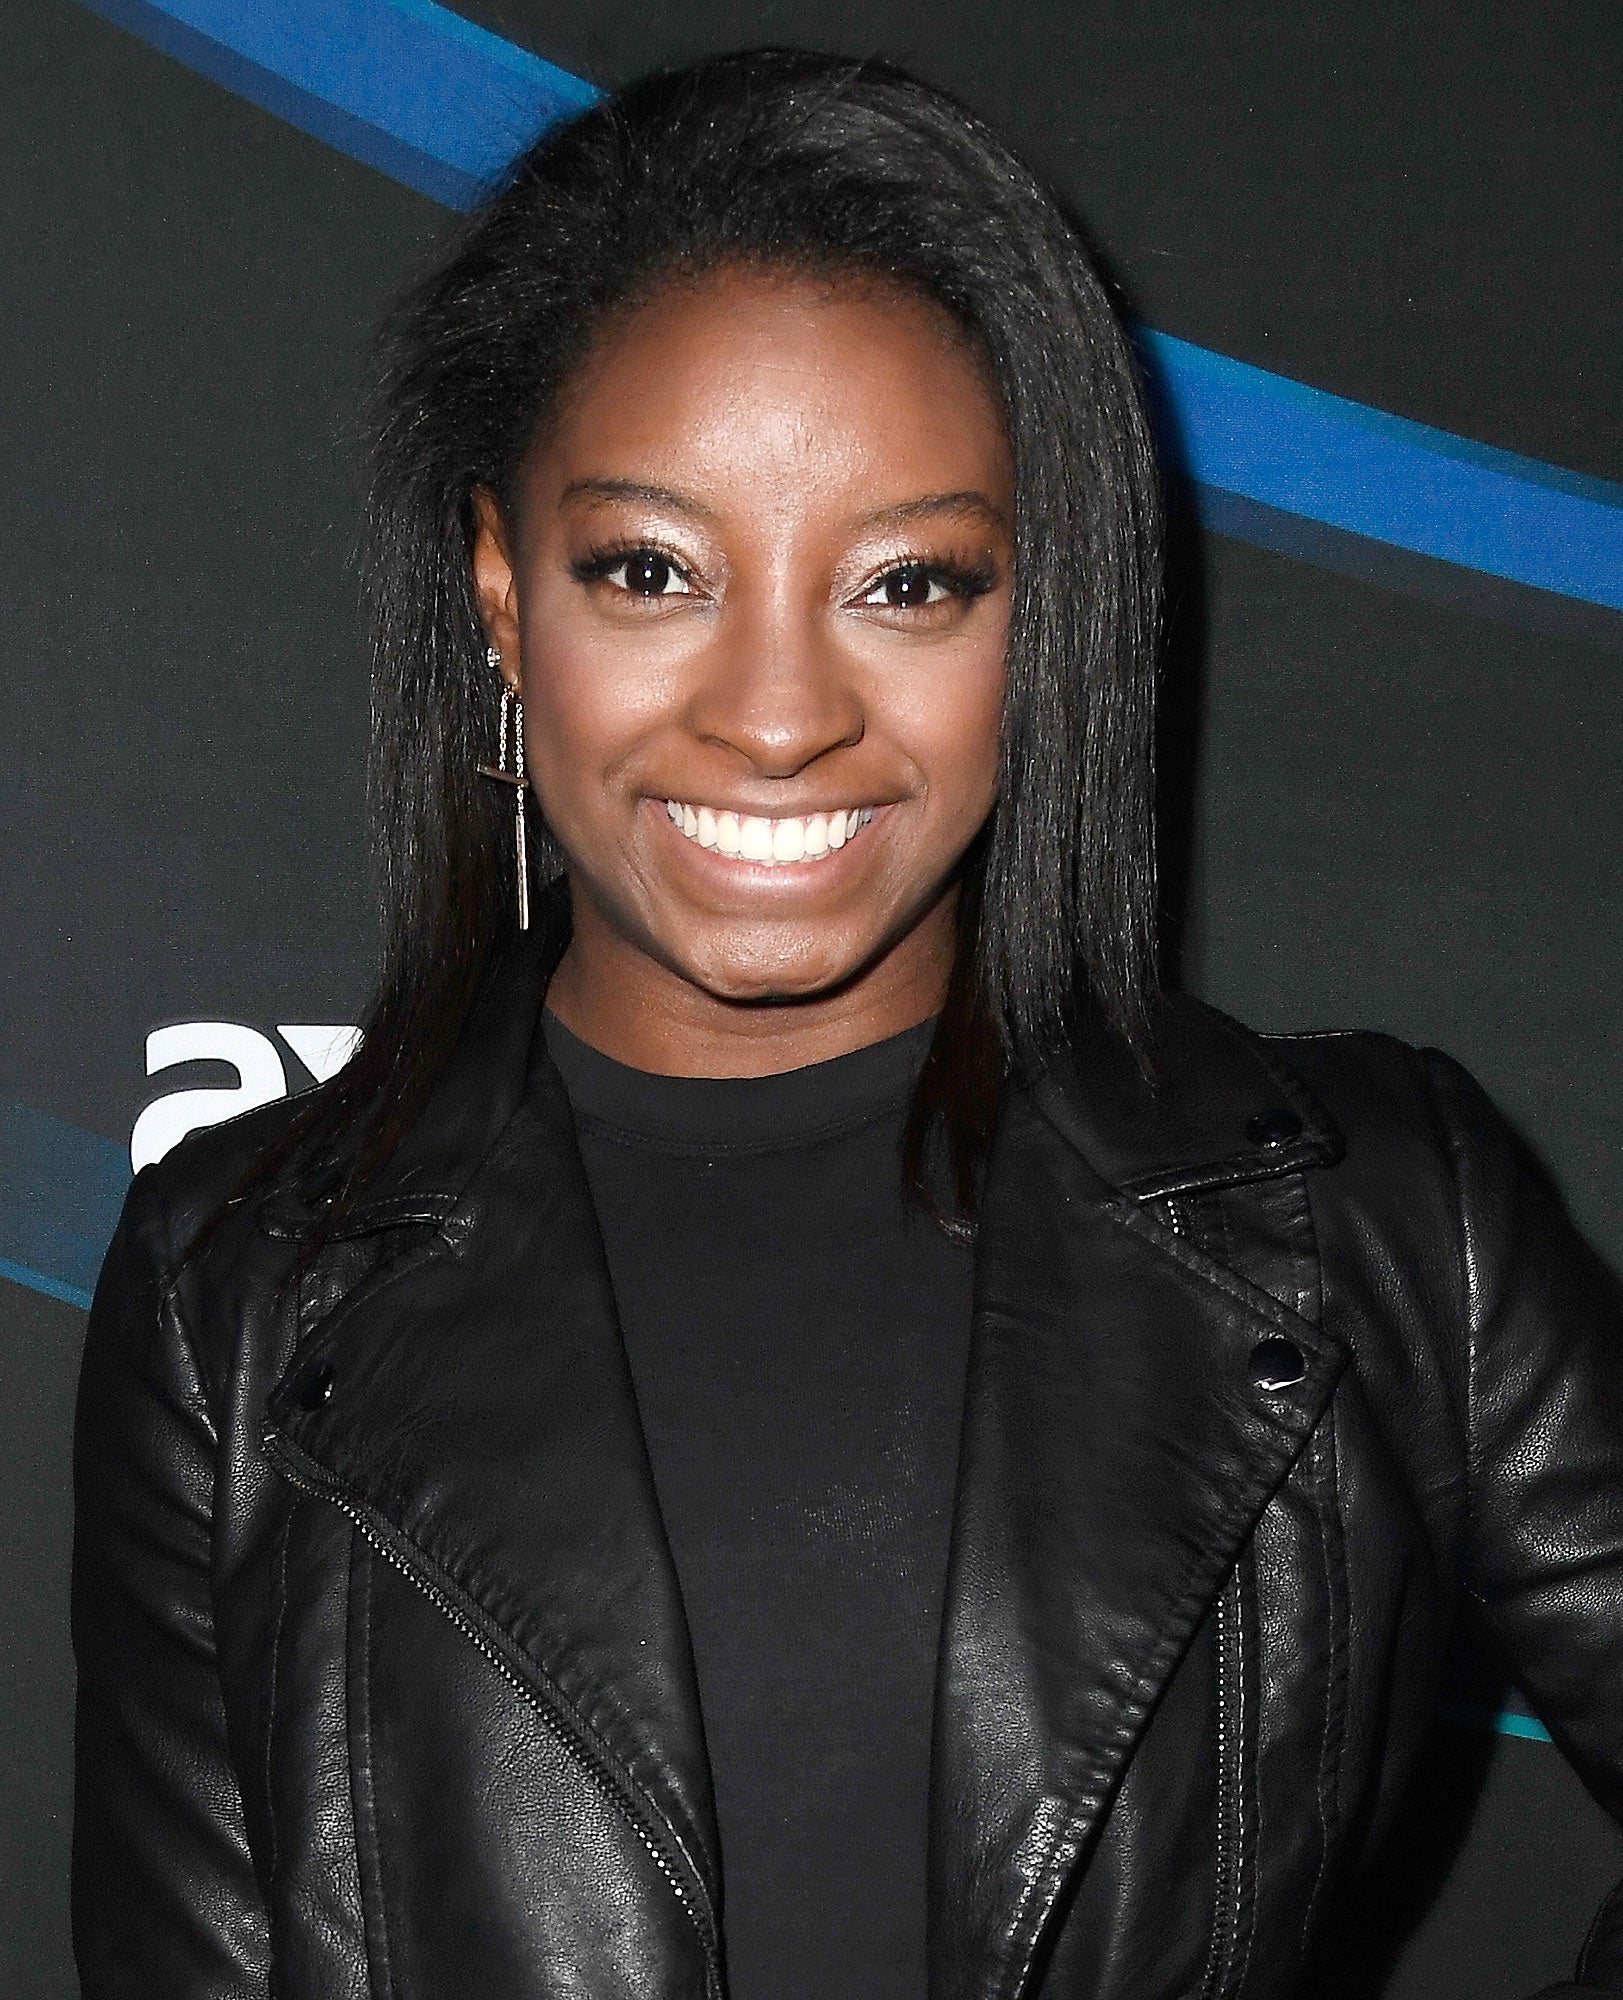 Simone Biles Reveals She's Never Had A Boyfriend — And Has Only Been On One Date!
